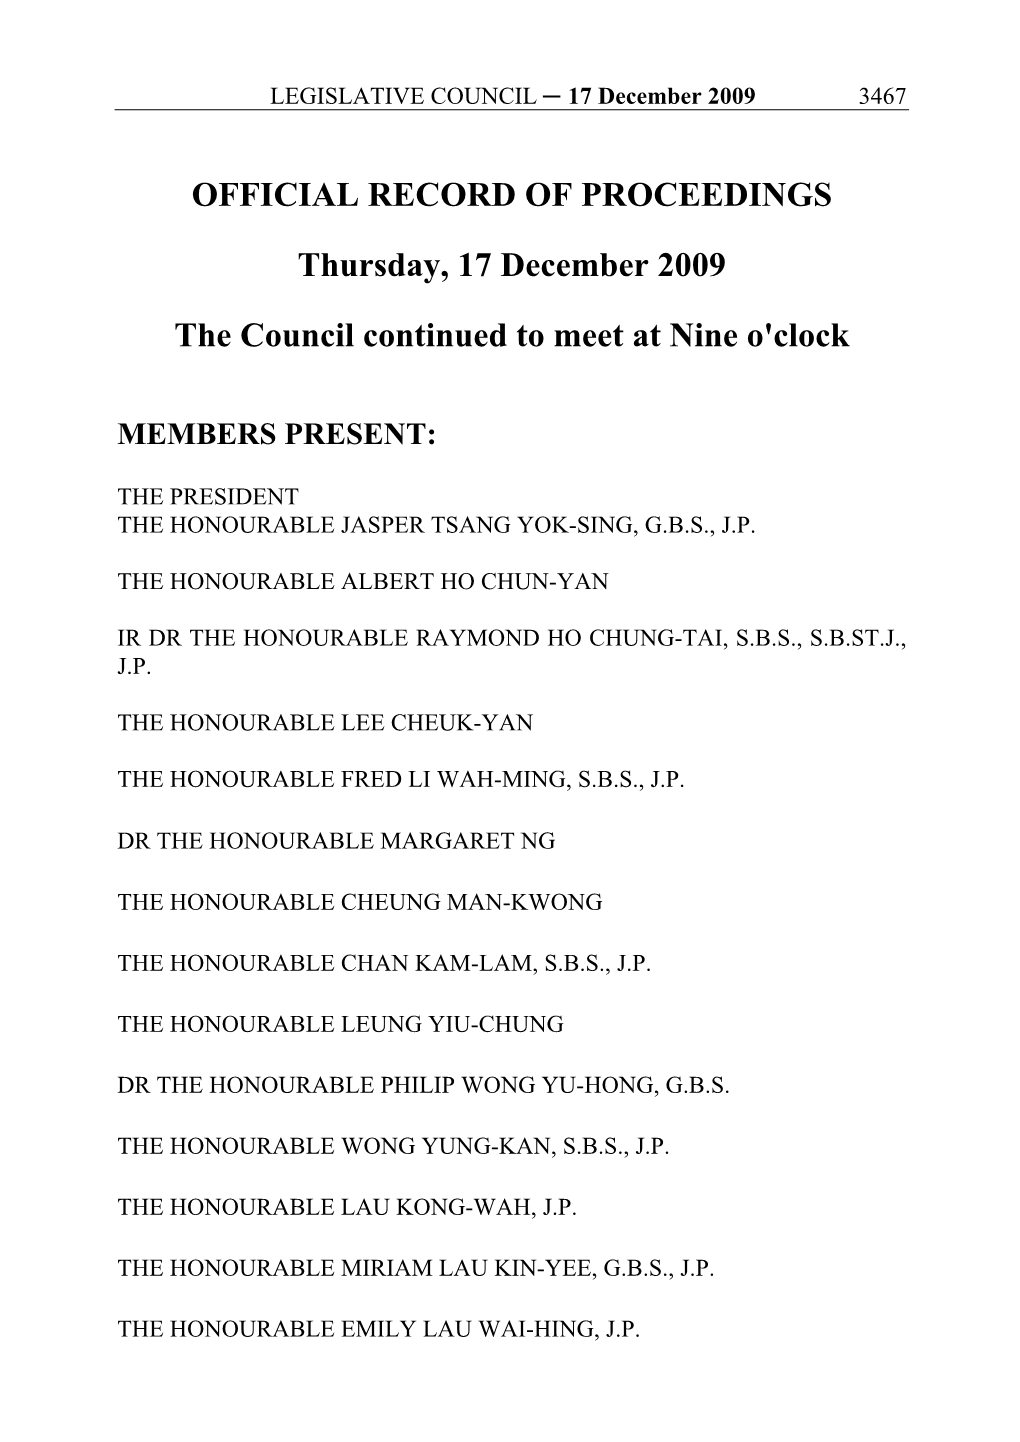 OFFICIAL RECORD of PROCEEDINGS Thursday, 17